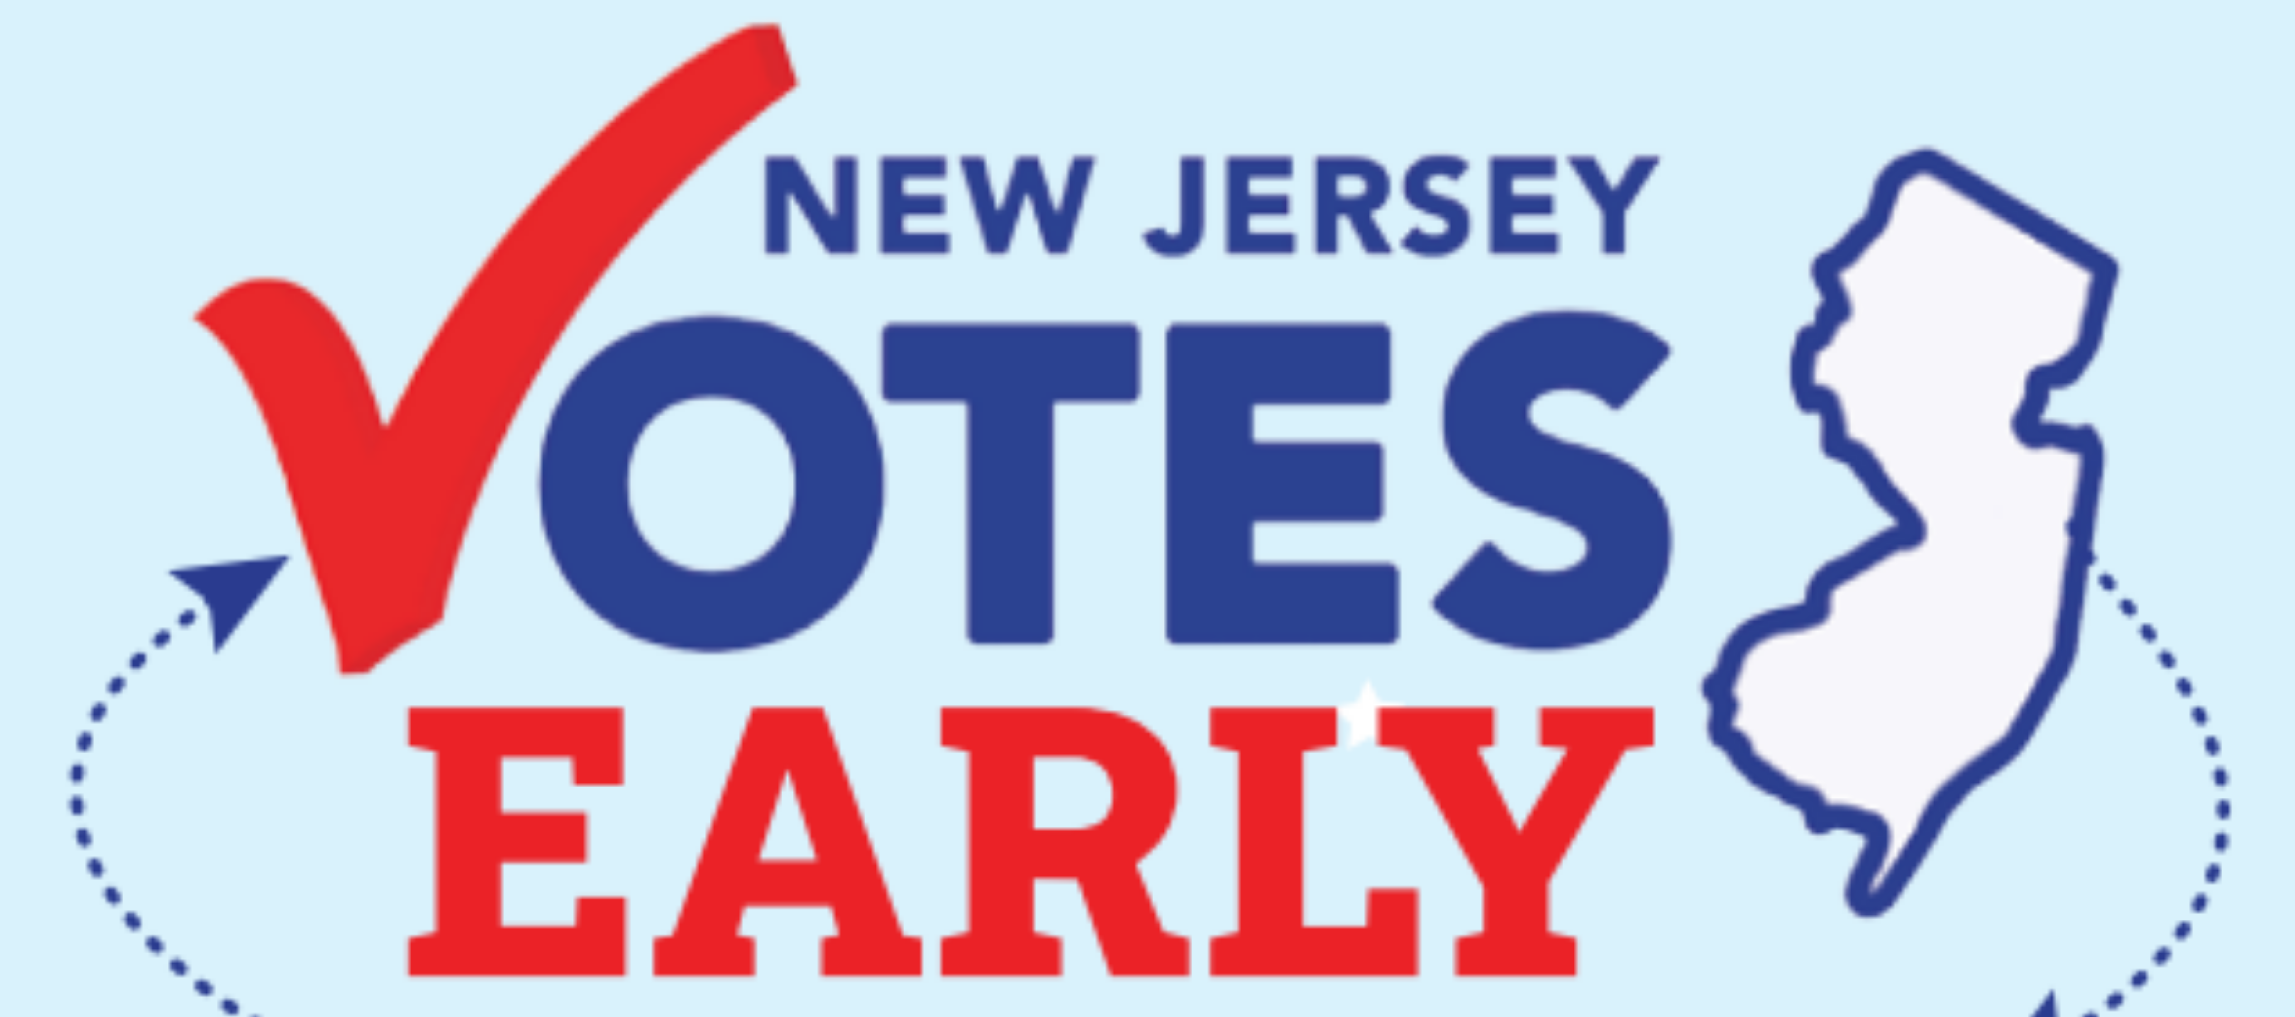 Early Voting Period